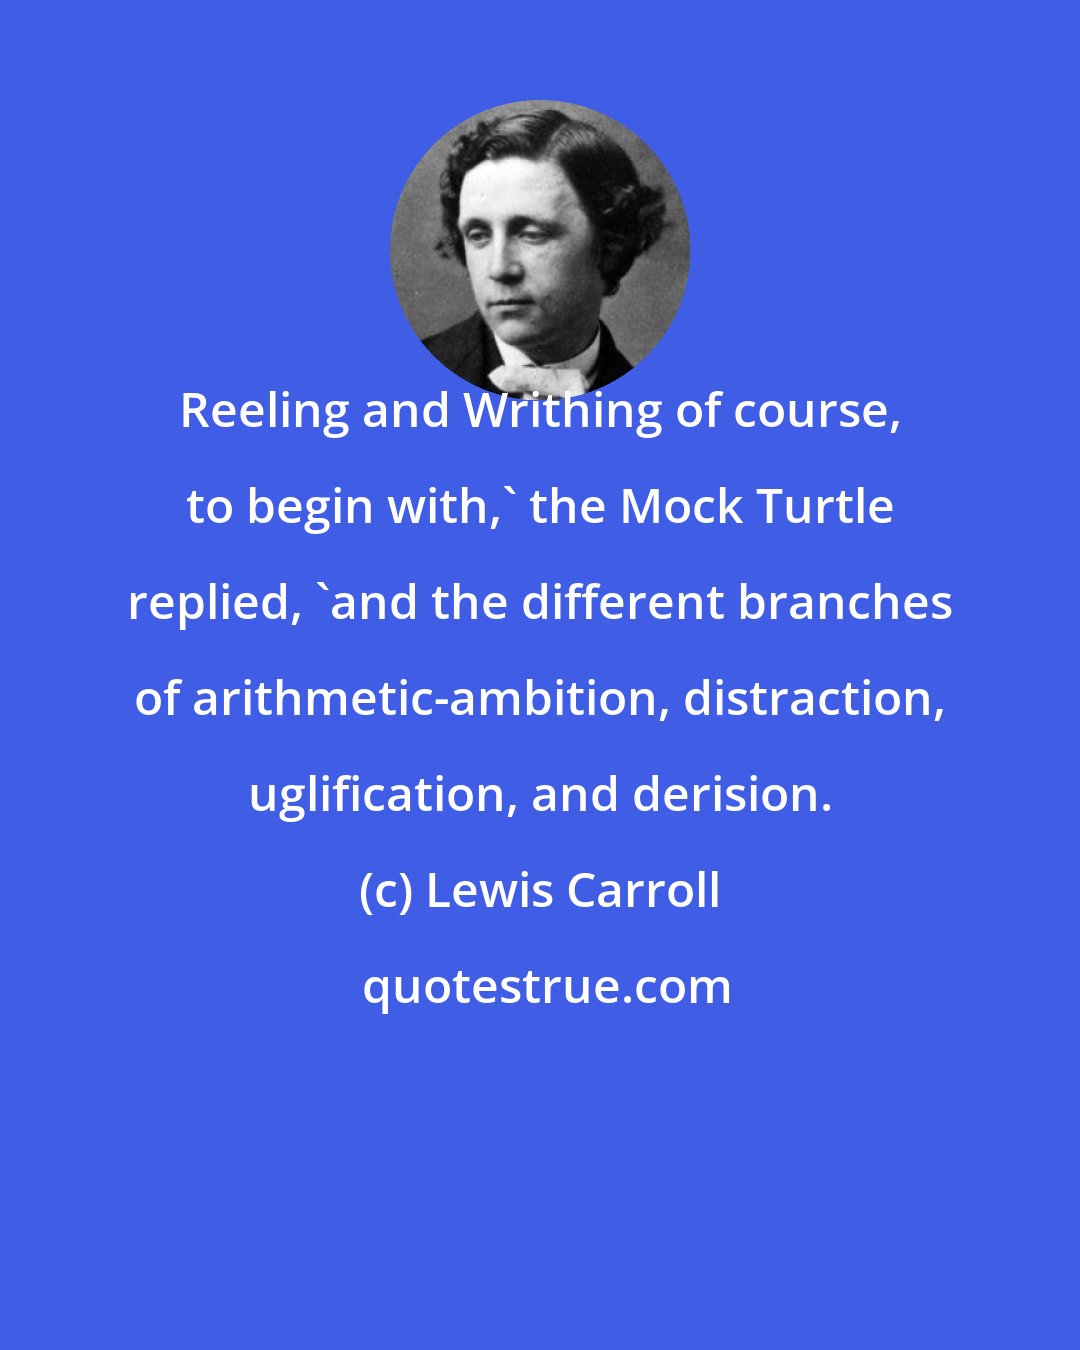 Lewis Carroll: Reeling and Writhing of course, to begin with,' the Mock Turtle replied, 'and the different branches of arithmetic-ambition, distraction, uglification, and derision.